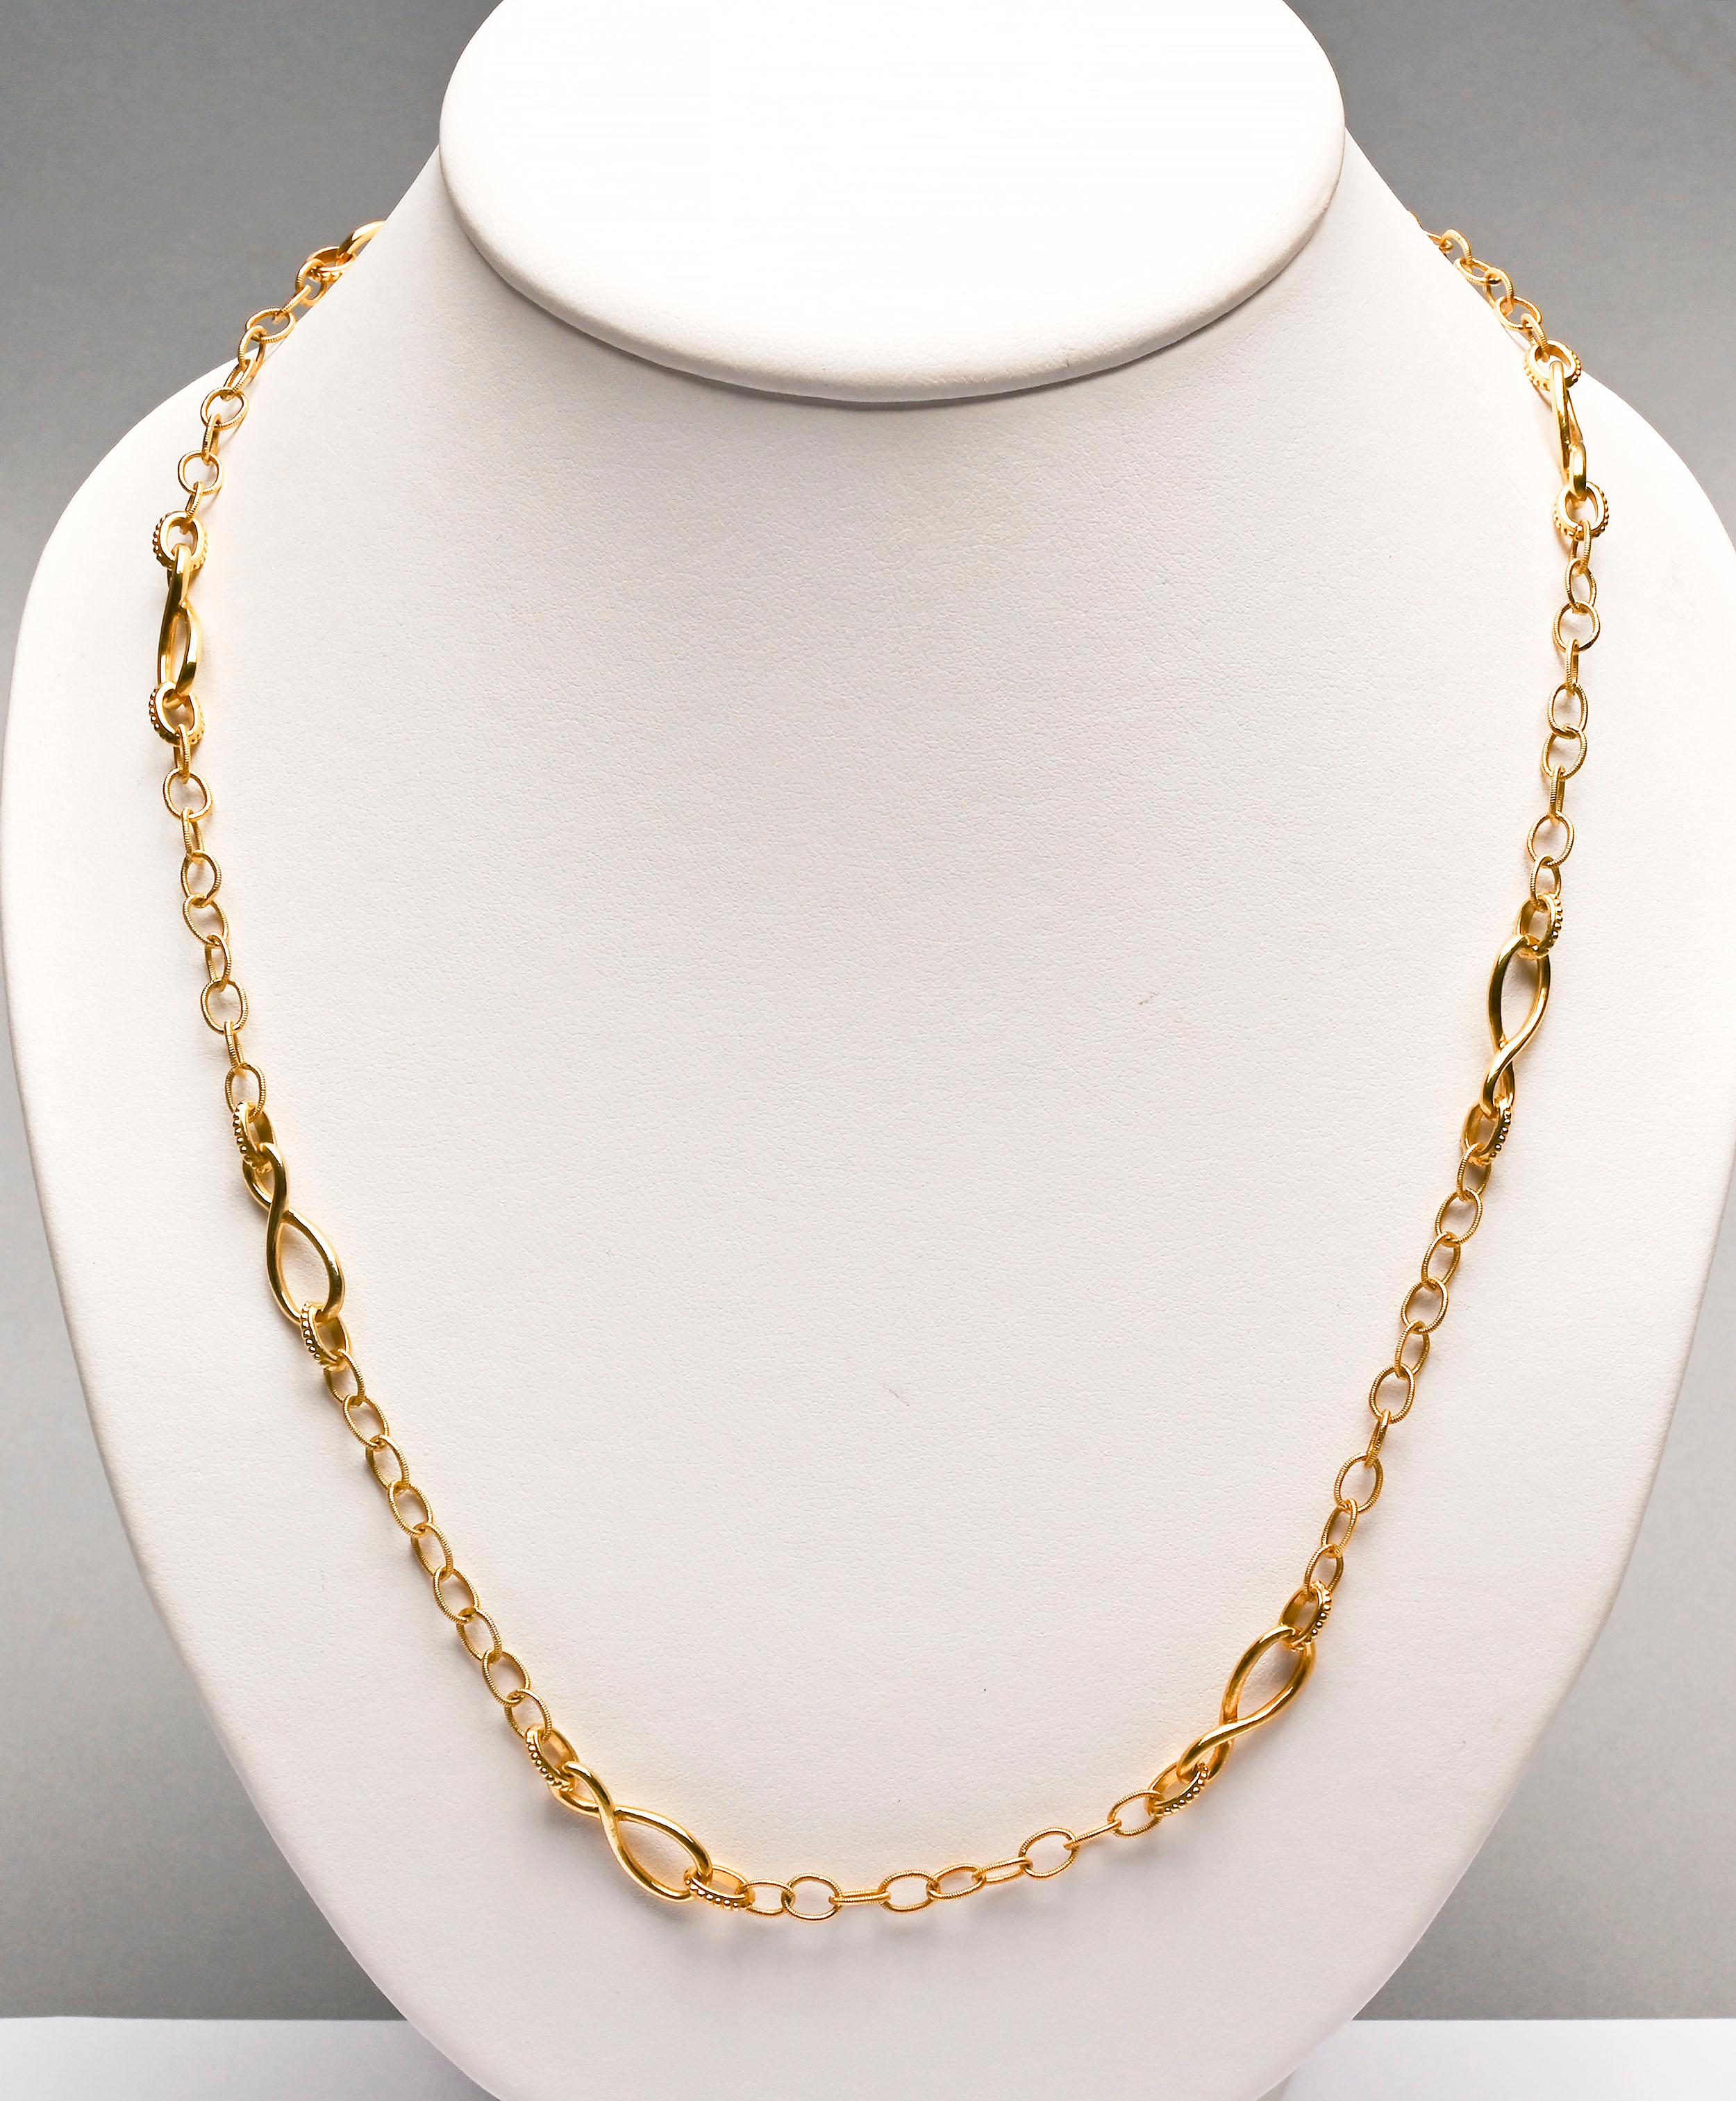 This long 18 karat gold necklace is made of three different links. Largest is a figure eight that measures 1/4